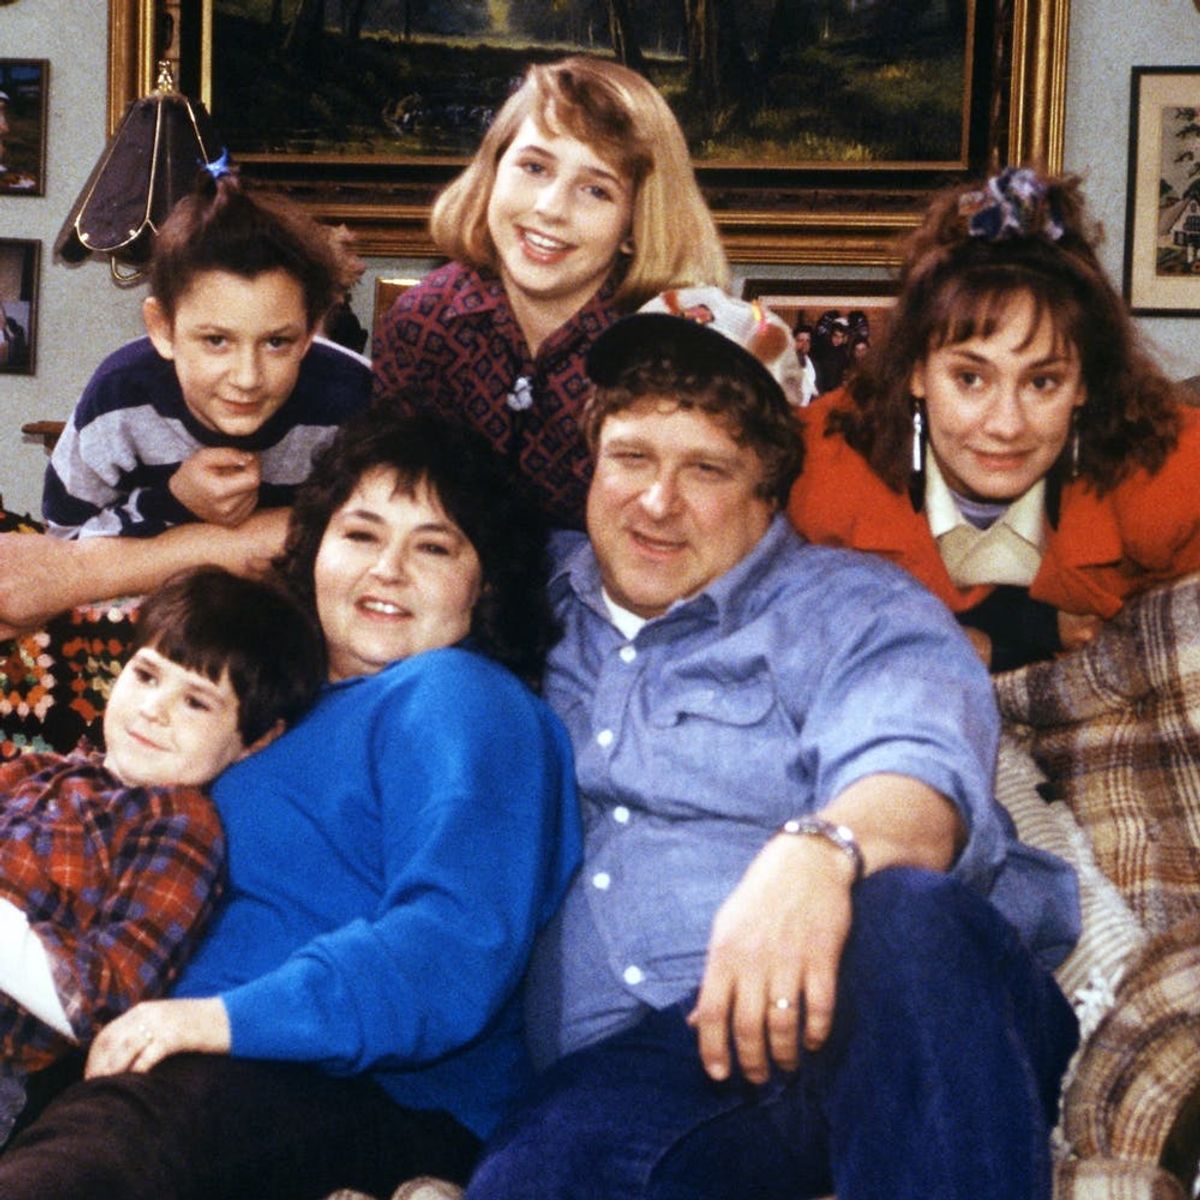 The First Pic of the “Roseanne” Revival Is Here and It’s a ’90s Nostalgia DREAM